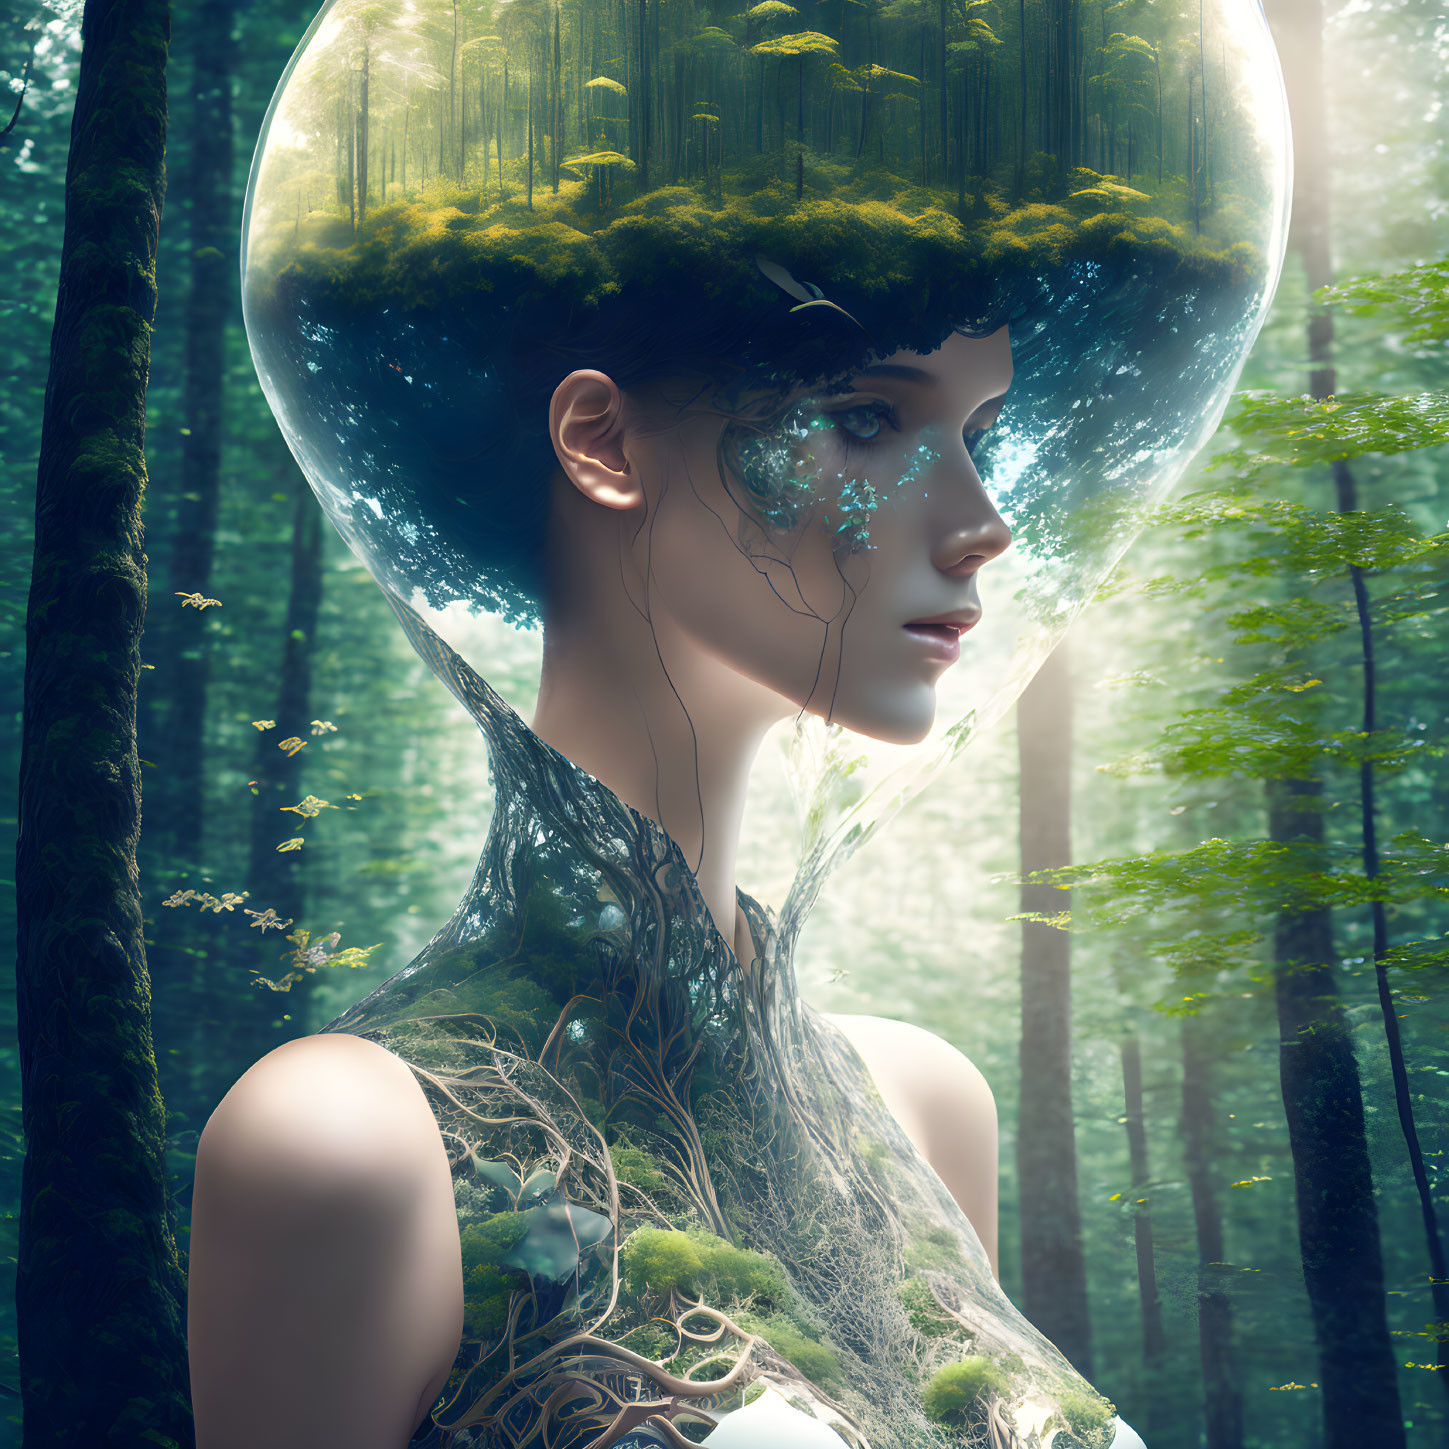 Surreal portrait features woman with transparent dome head and forest surroundings